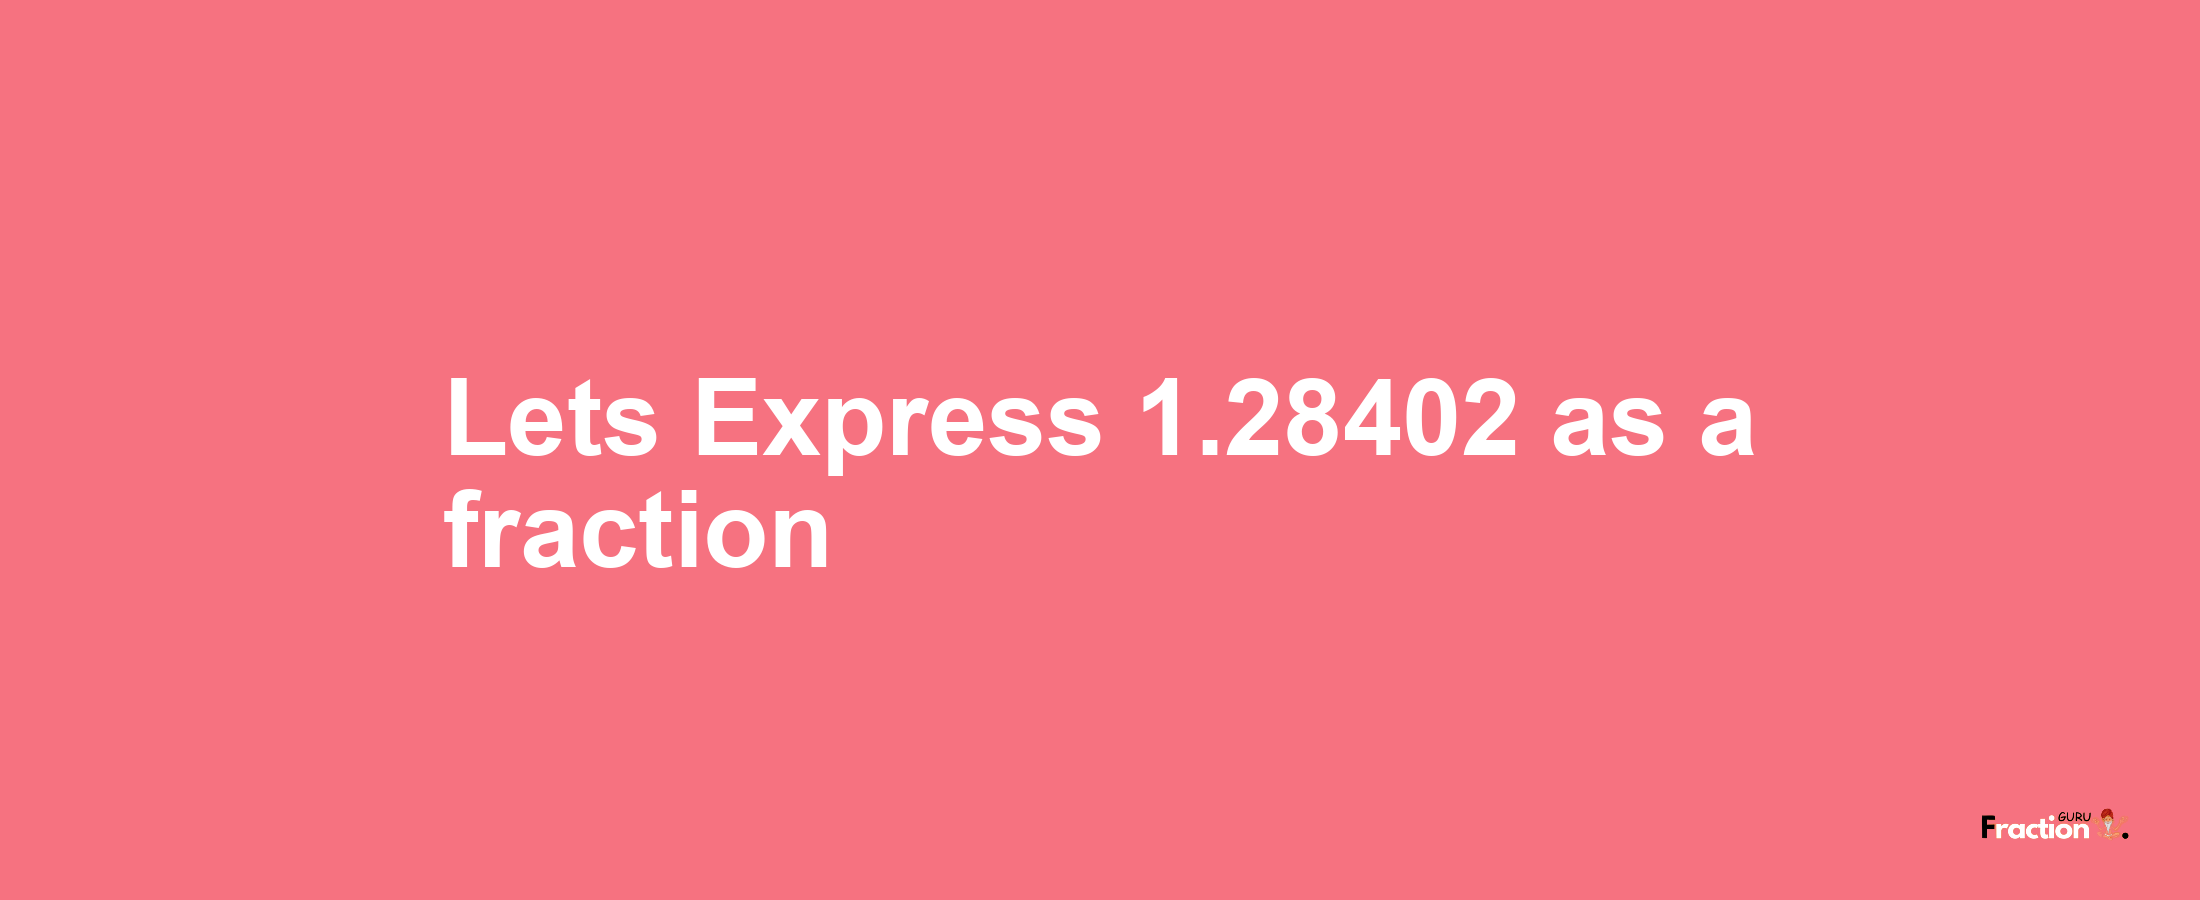 Lets Express 1.28402 as afraction